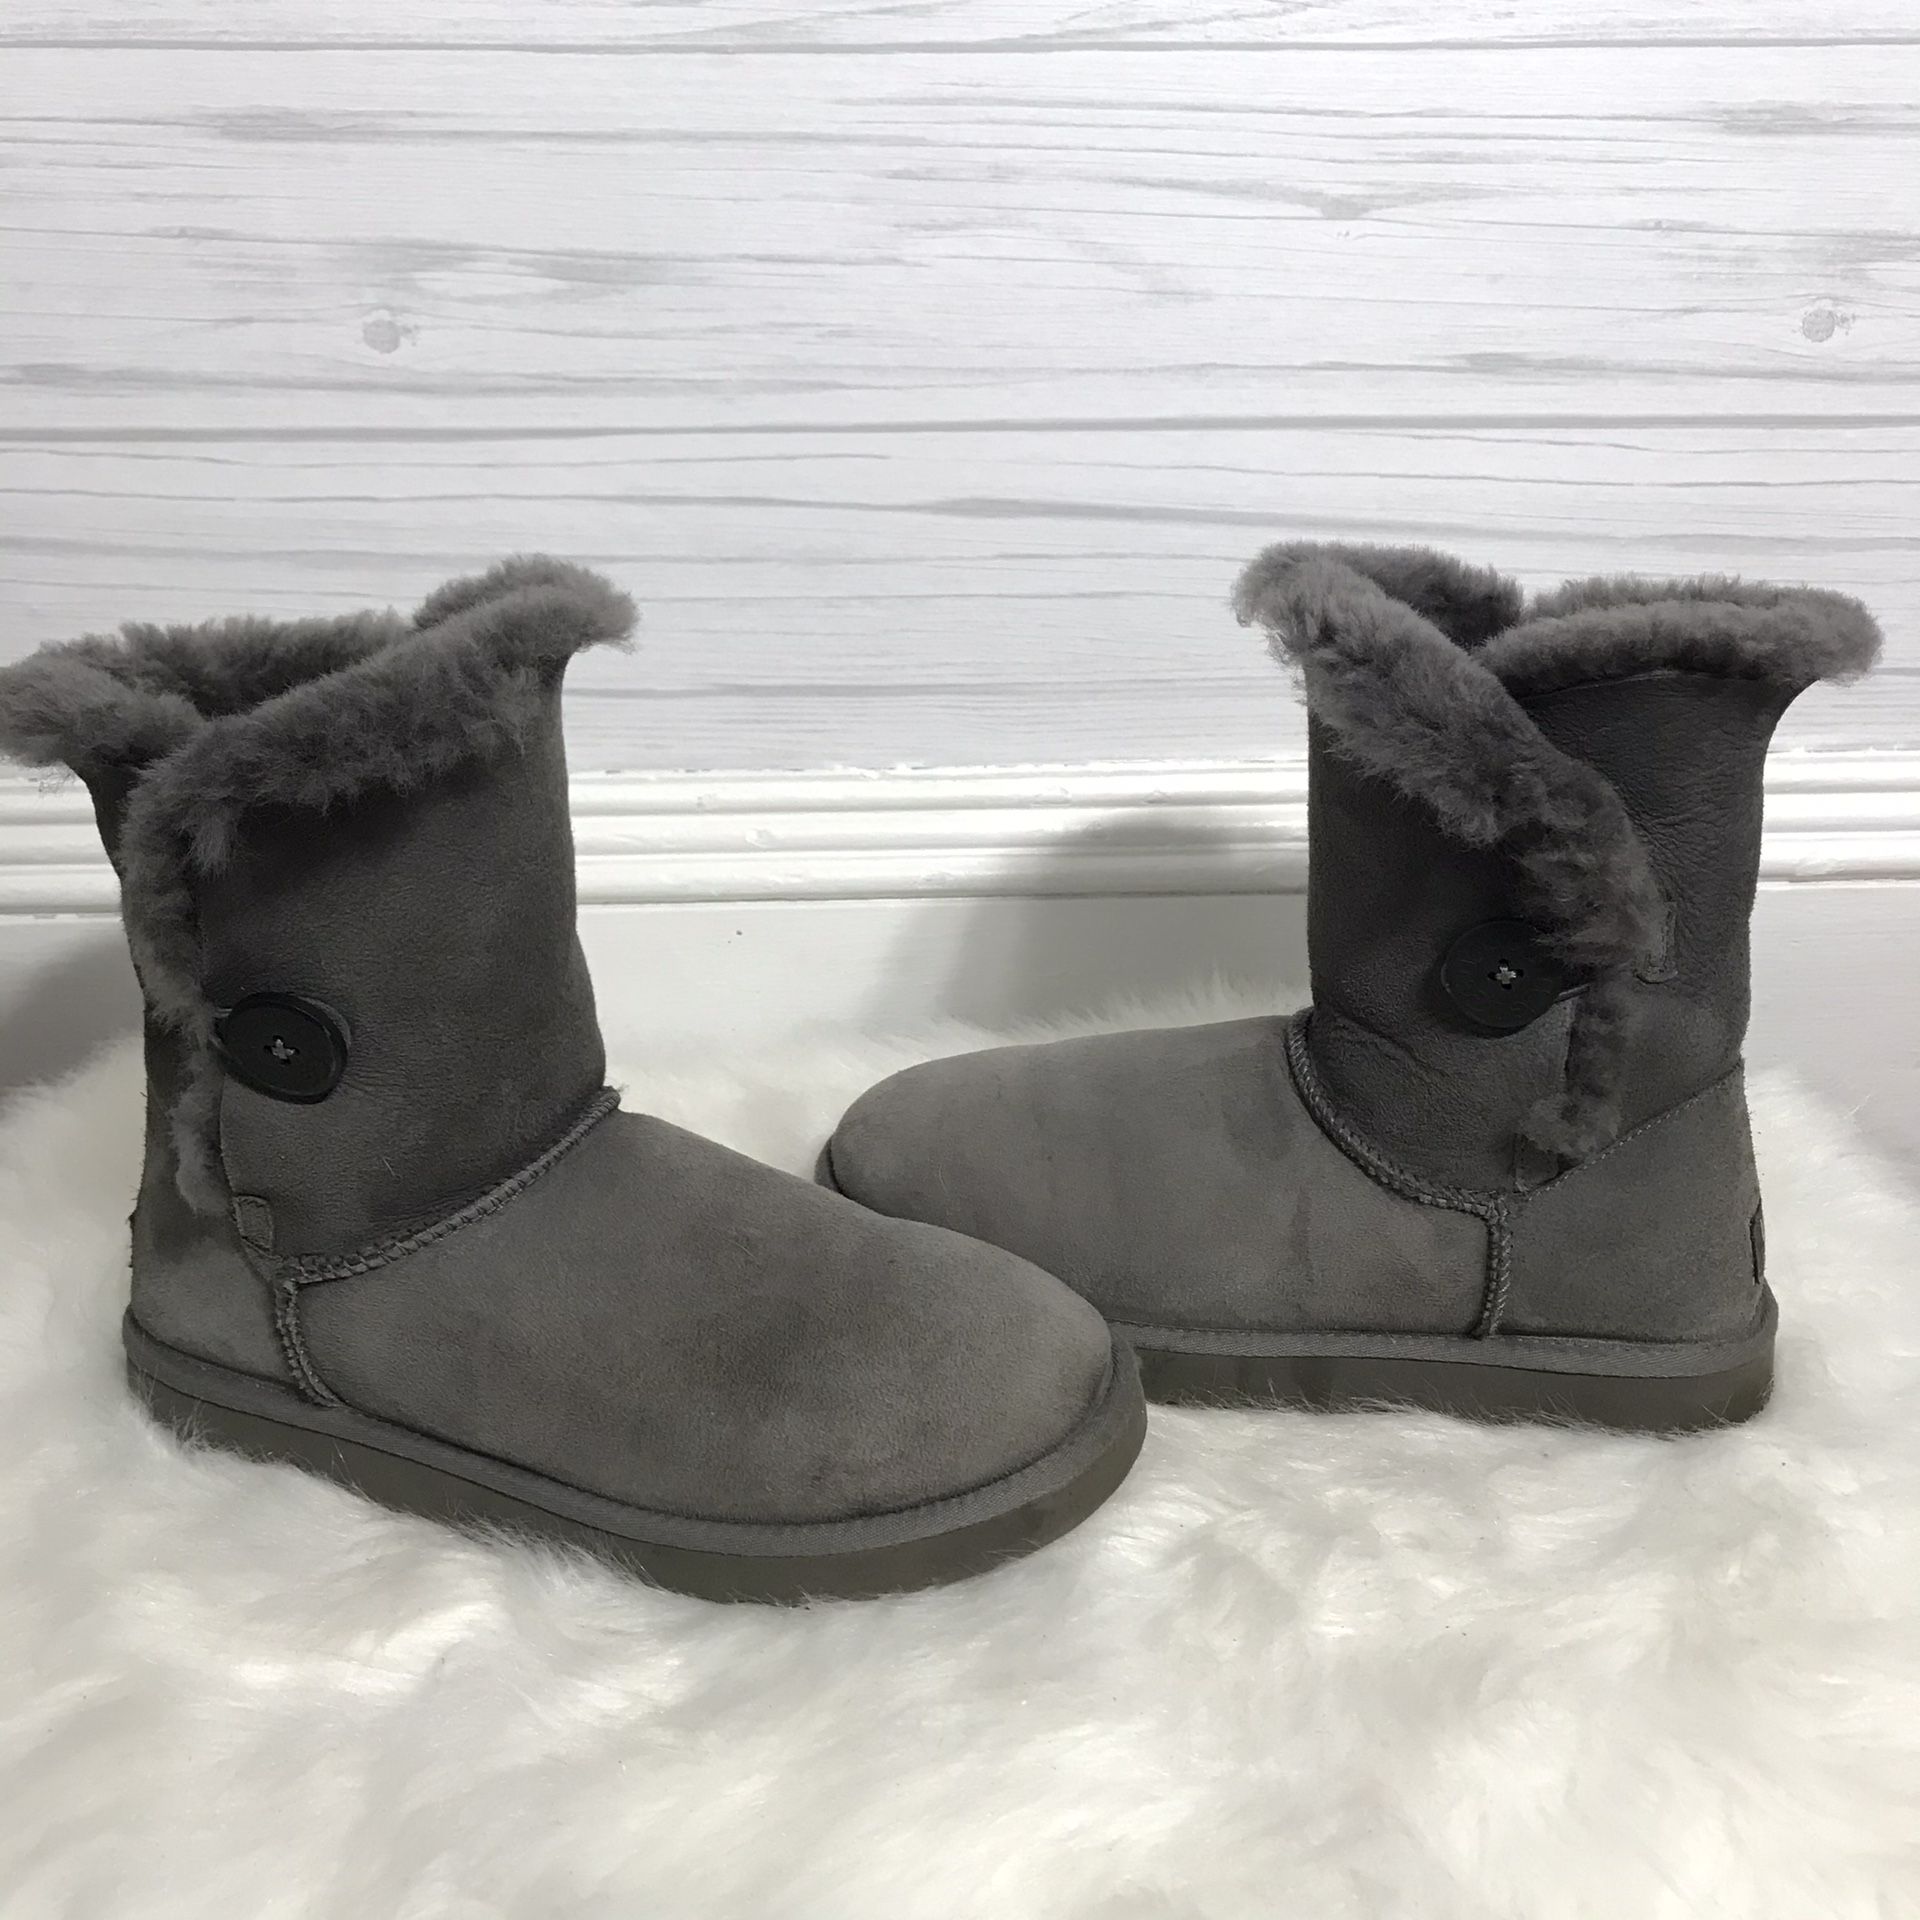 Authentic Grey Bailey Button Uggs size 10